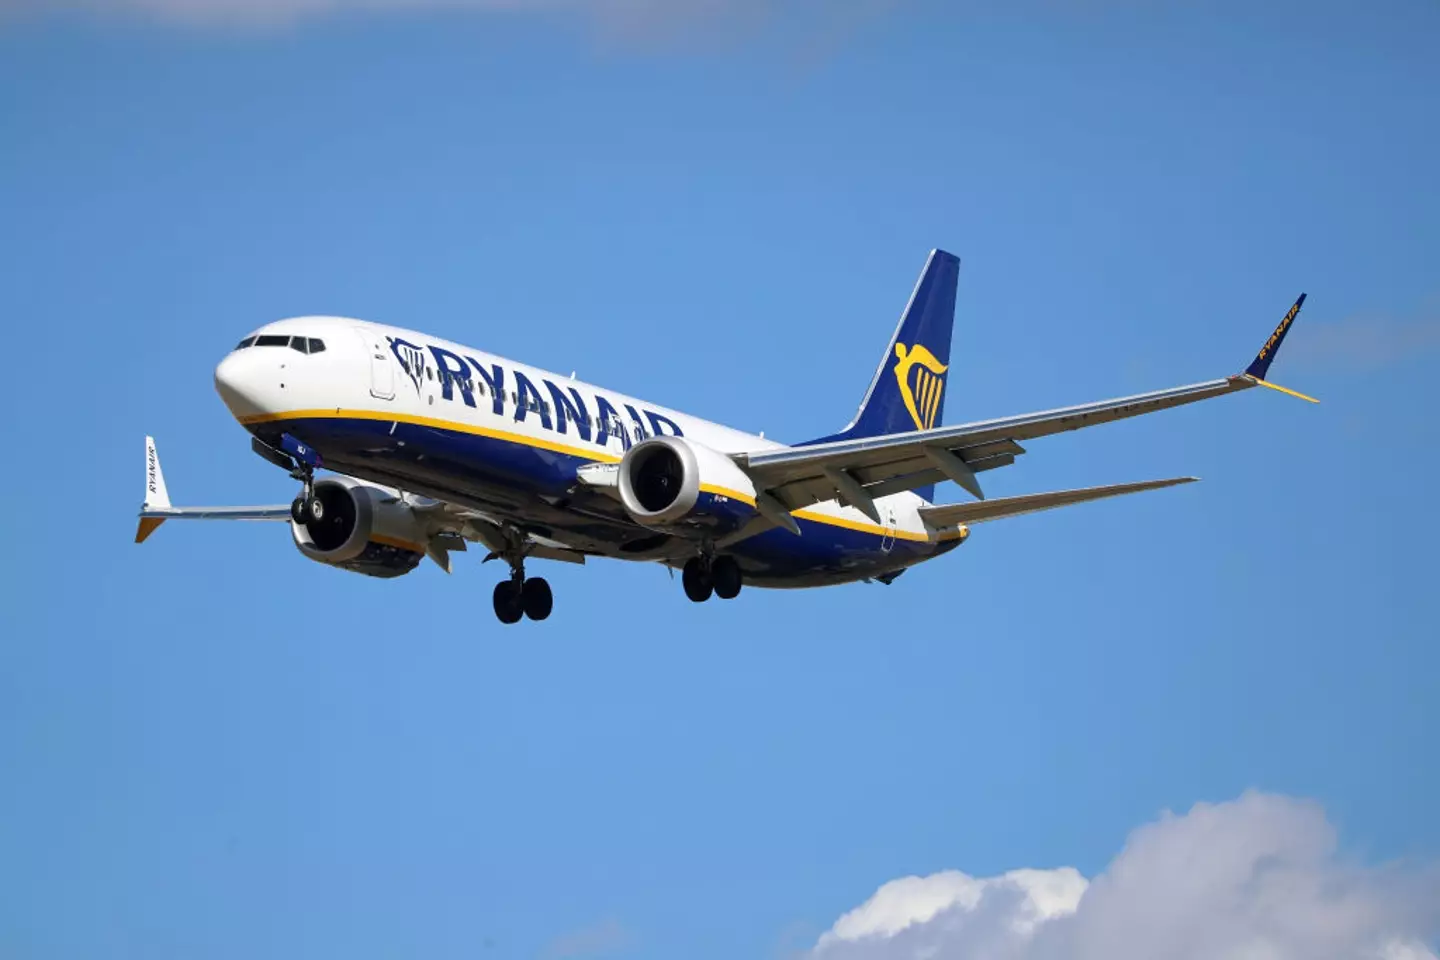 Many Brits will be flying with Ryanair. (Urbanandsport/NurPhoto via Getty Images)